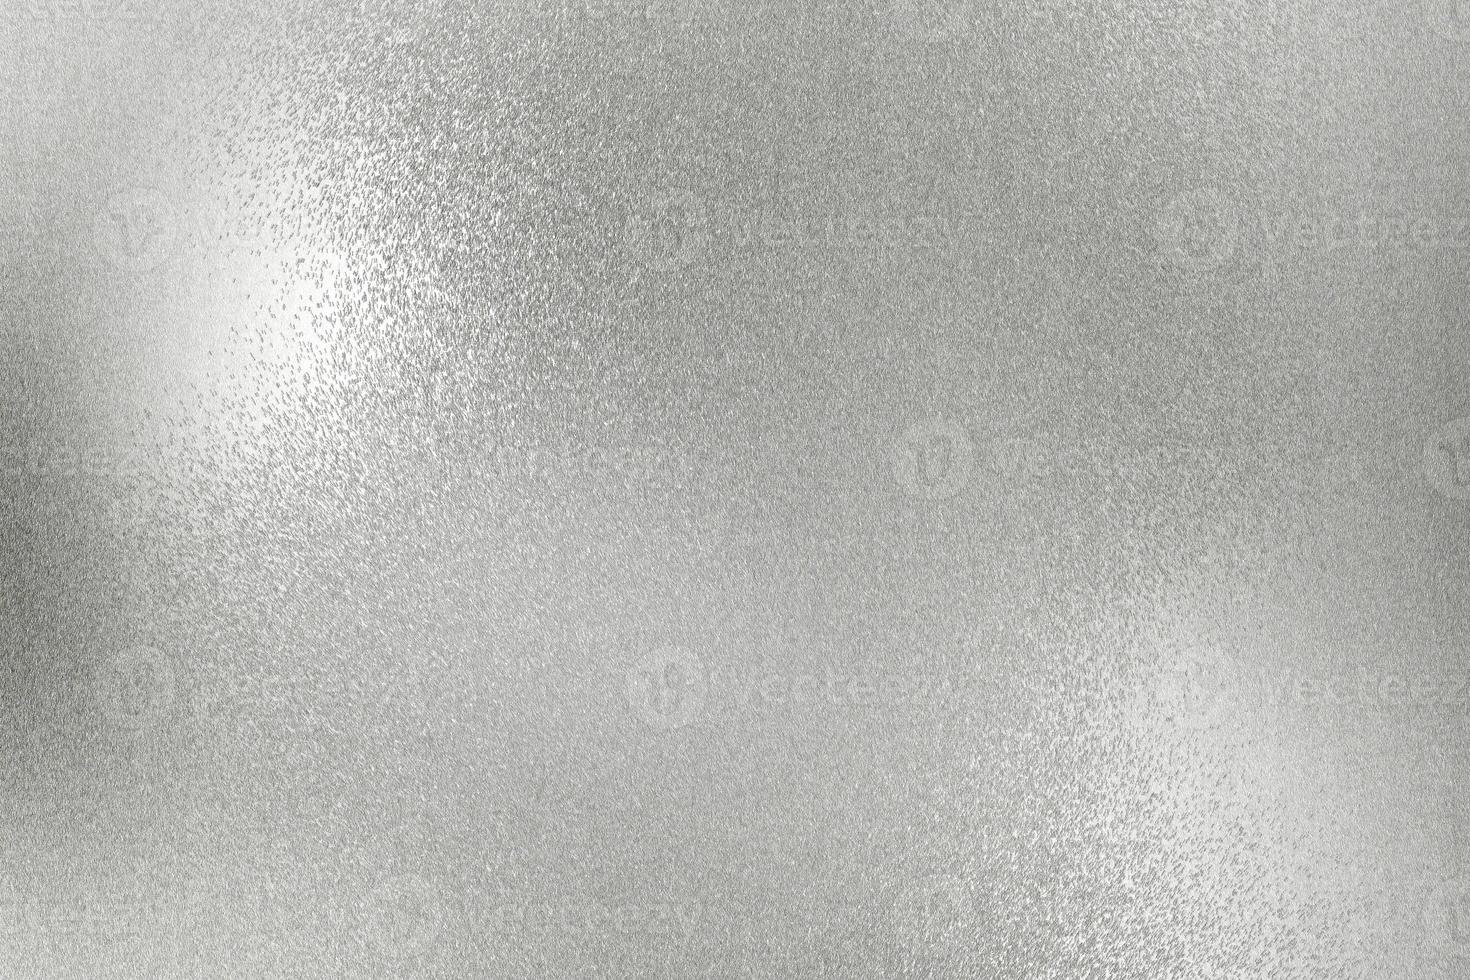 Shiny wave silver metal plate, abstract texture background photo